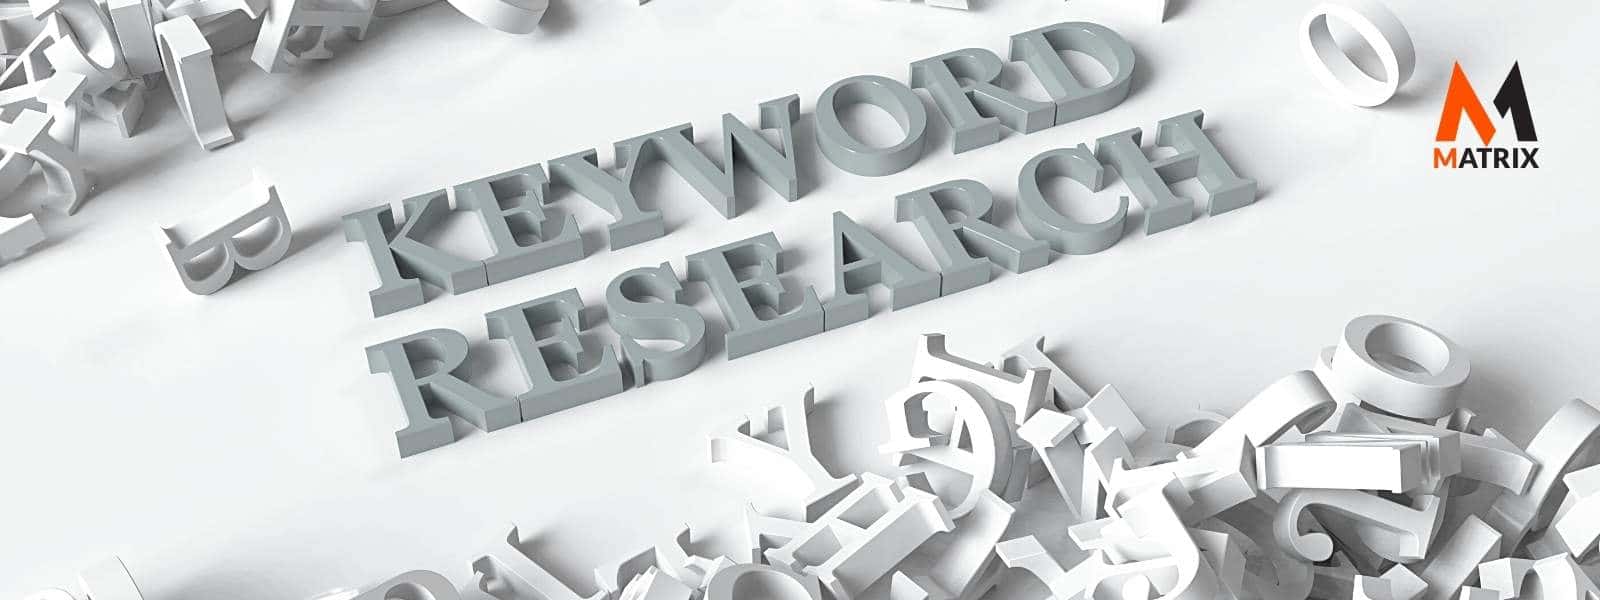 12 Best Keyword Research Tools